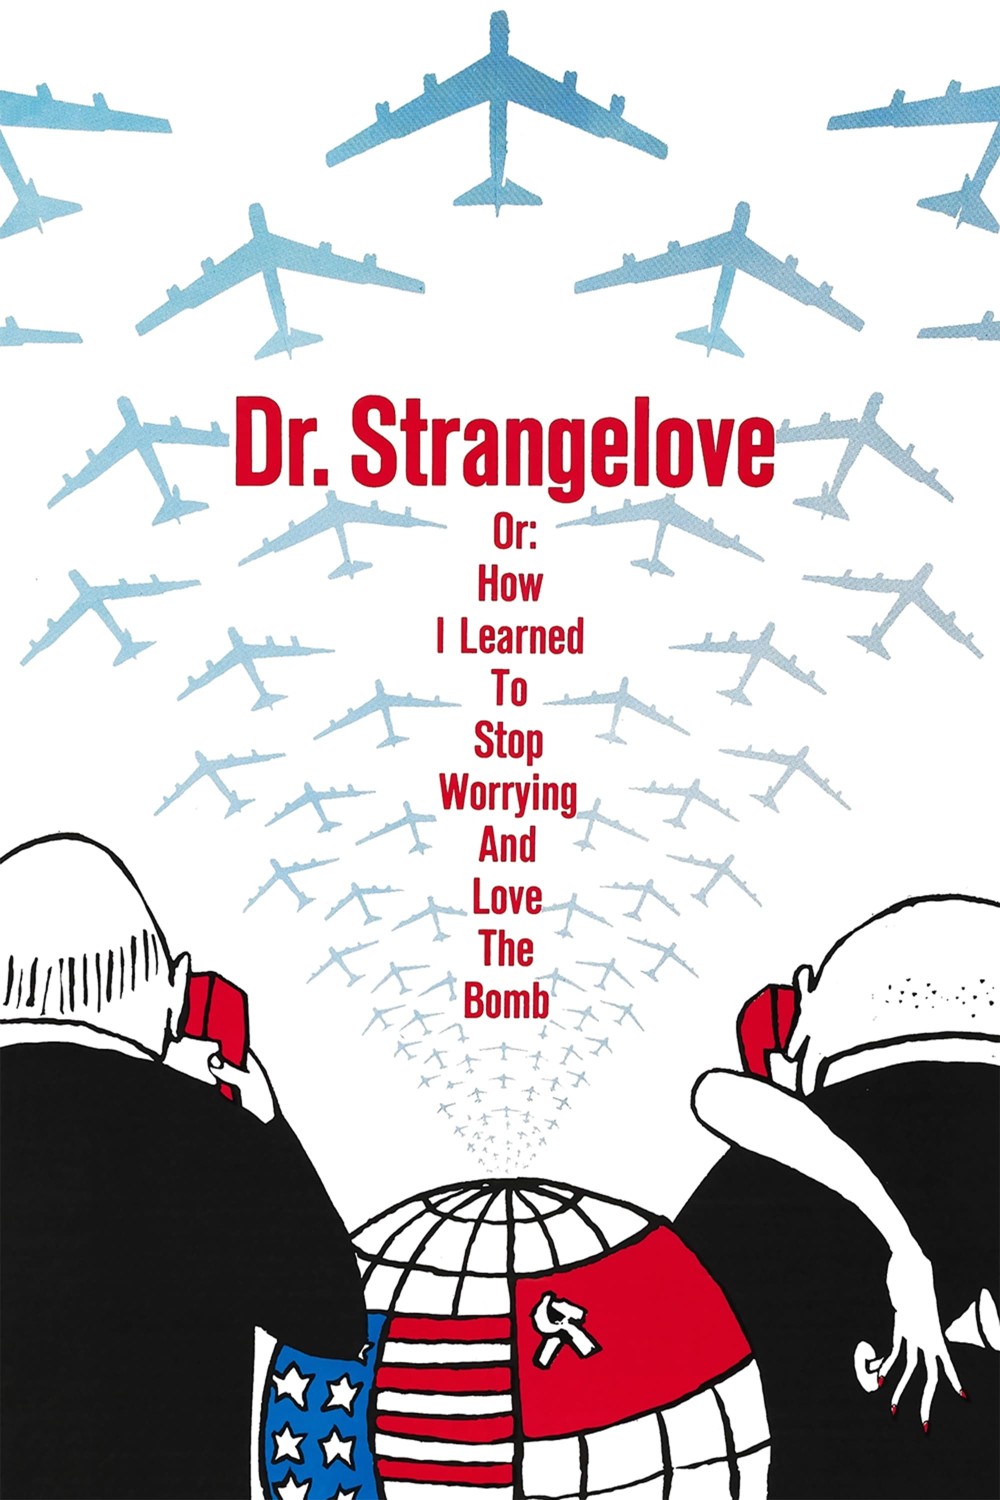 Dr. Strangelove or: How I Learned to Stop Worrying and Love the Bomb (1964) [1080p] BluRay (x264) 649332b6e76434e81a57a59954f03ac4